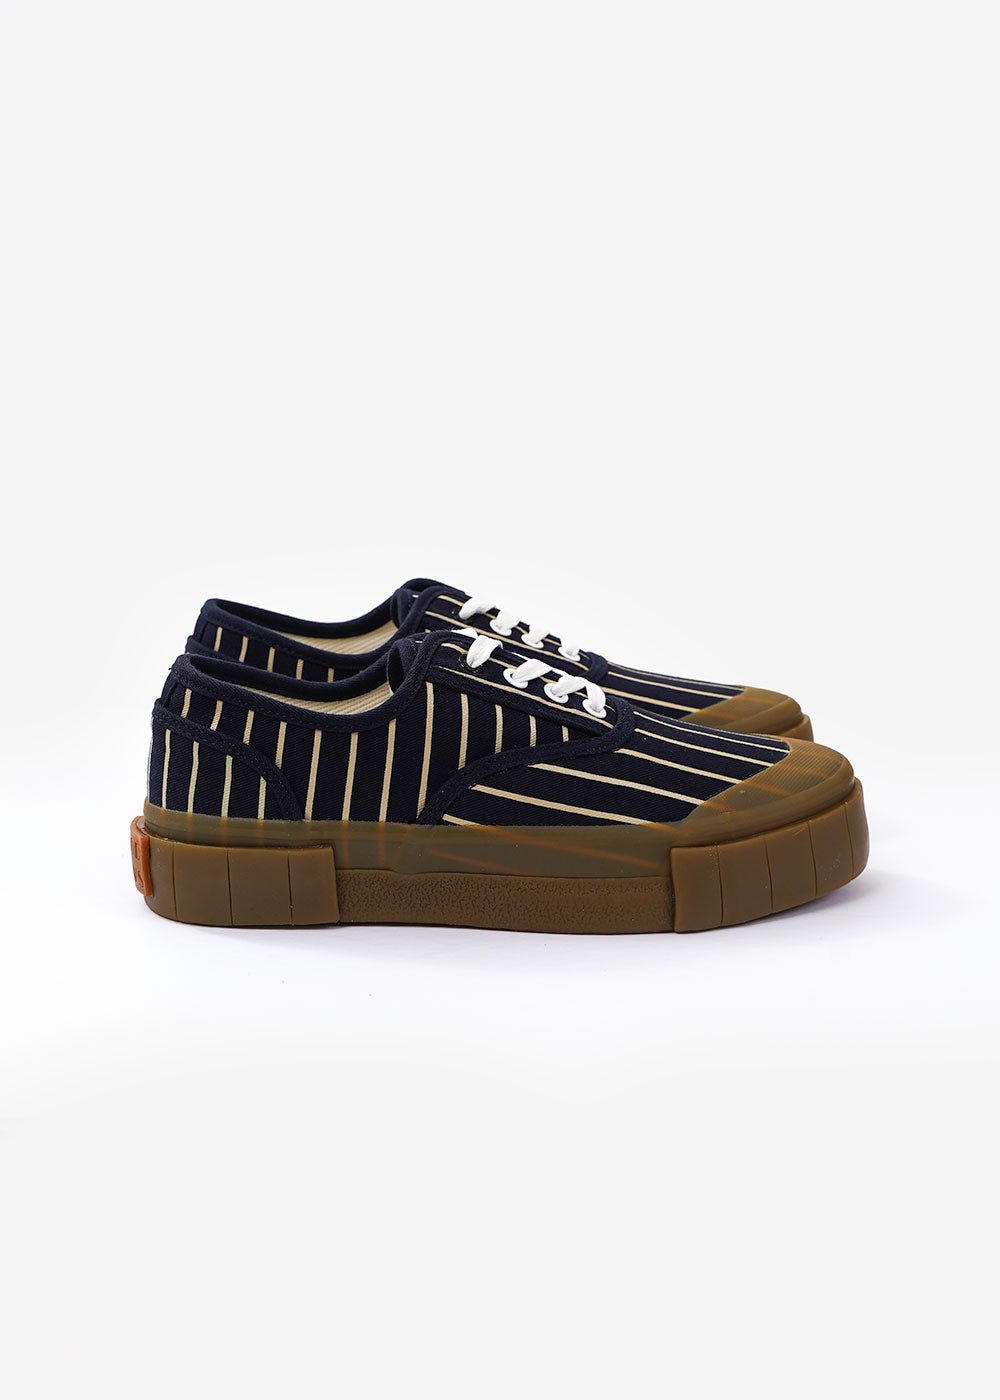 GOOD NEWS Hurler 2 Low Sneakers — Shop sustainable fashion and slow fashion at New Classics Studios